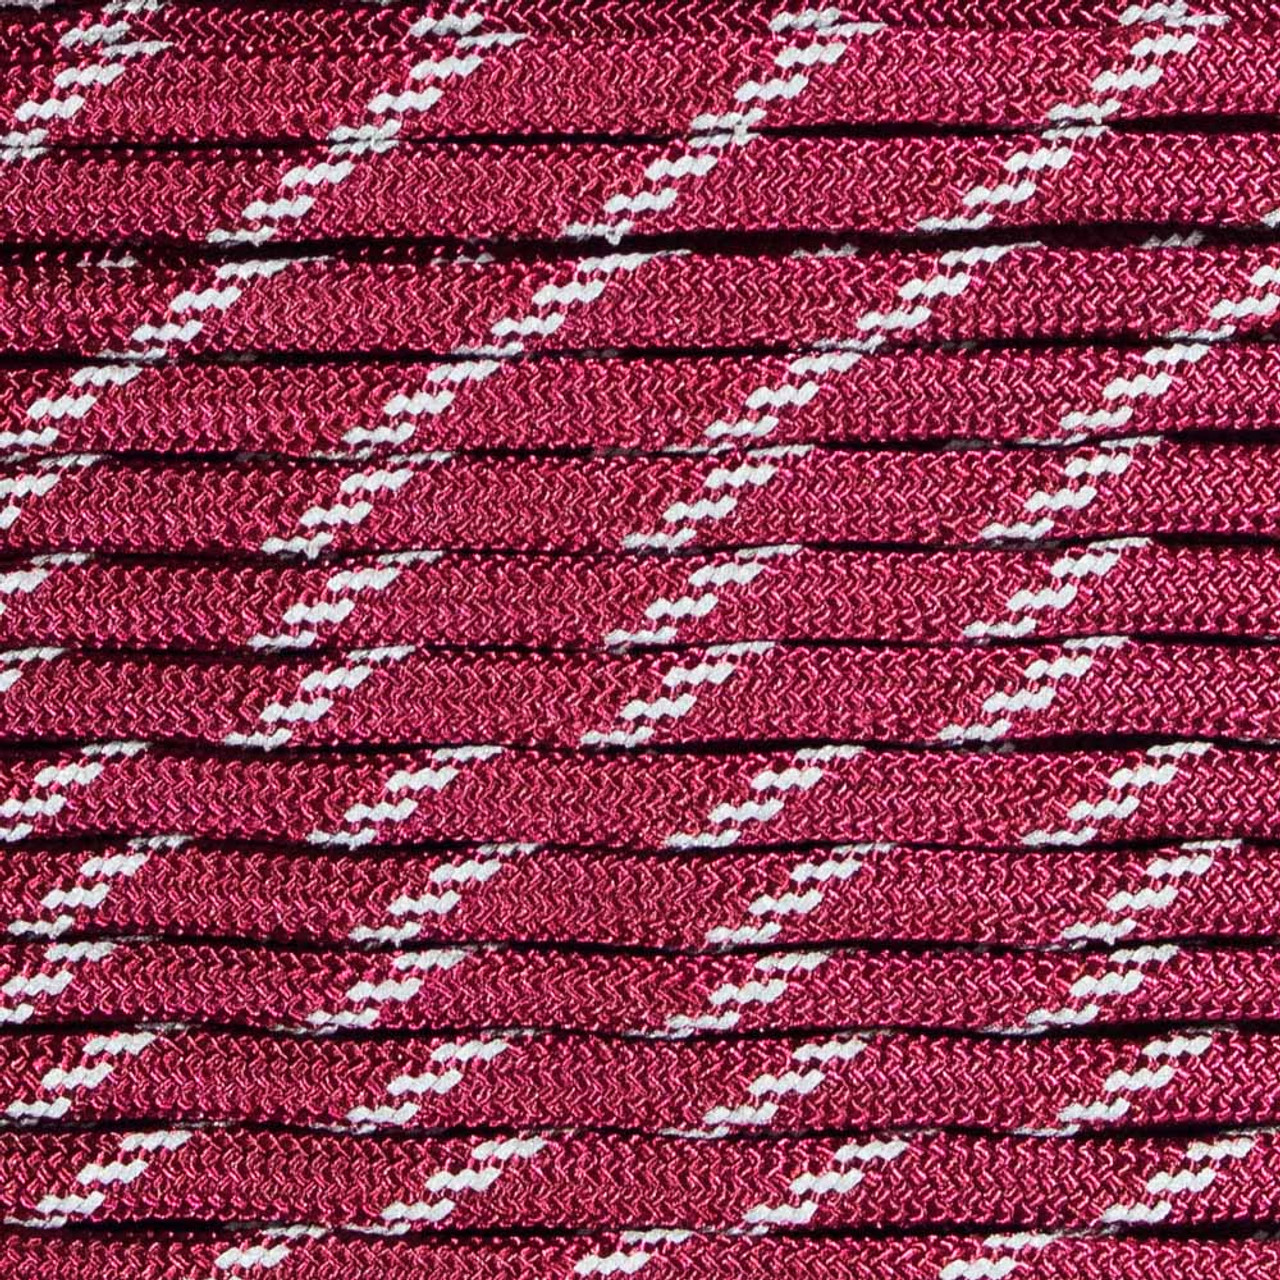 Burgundy - 550 Paracord with Reflective Tracers